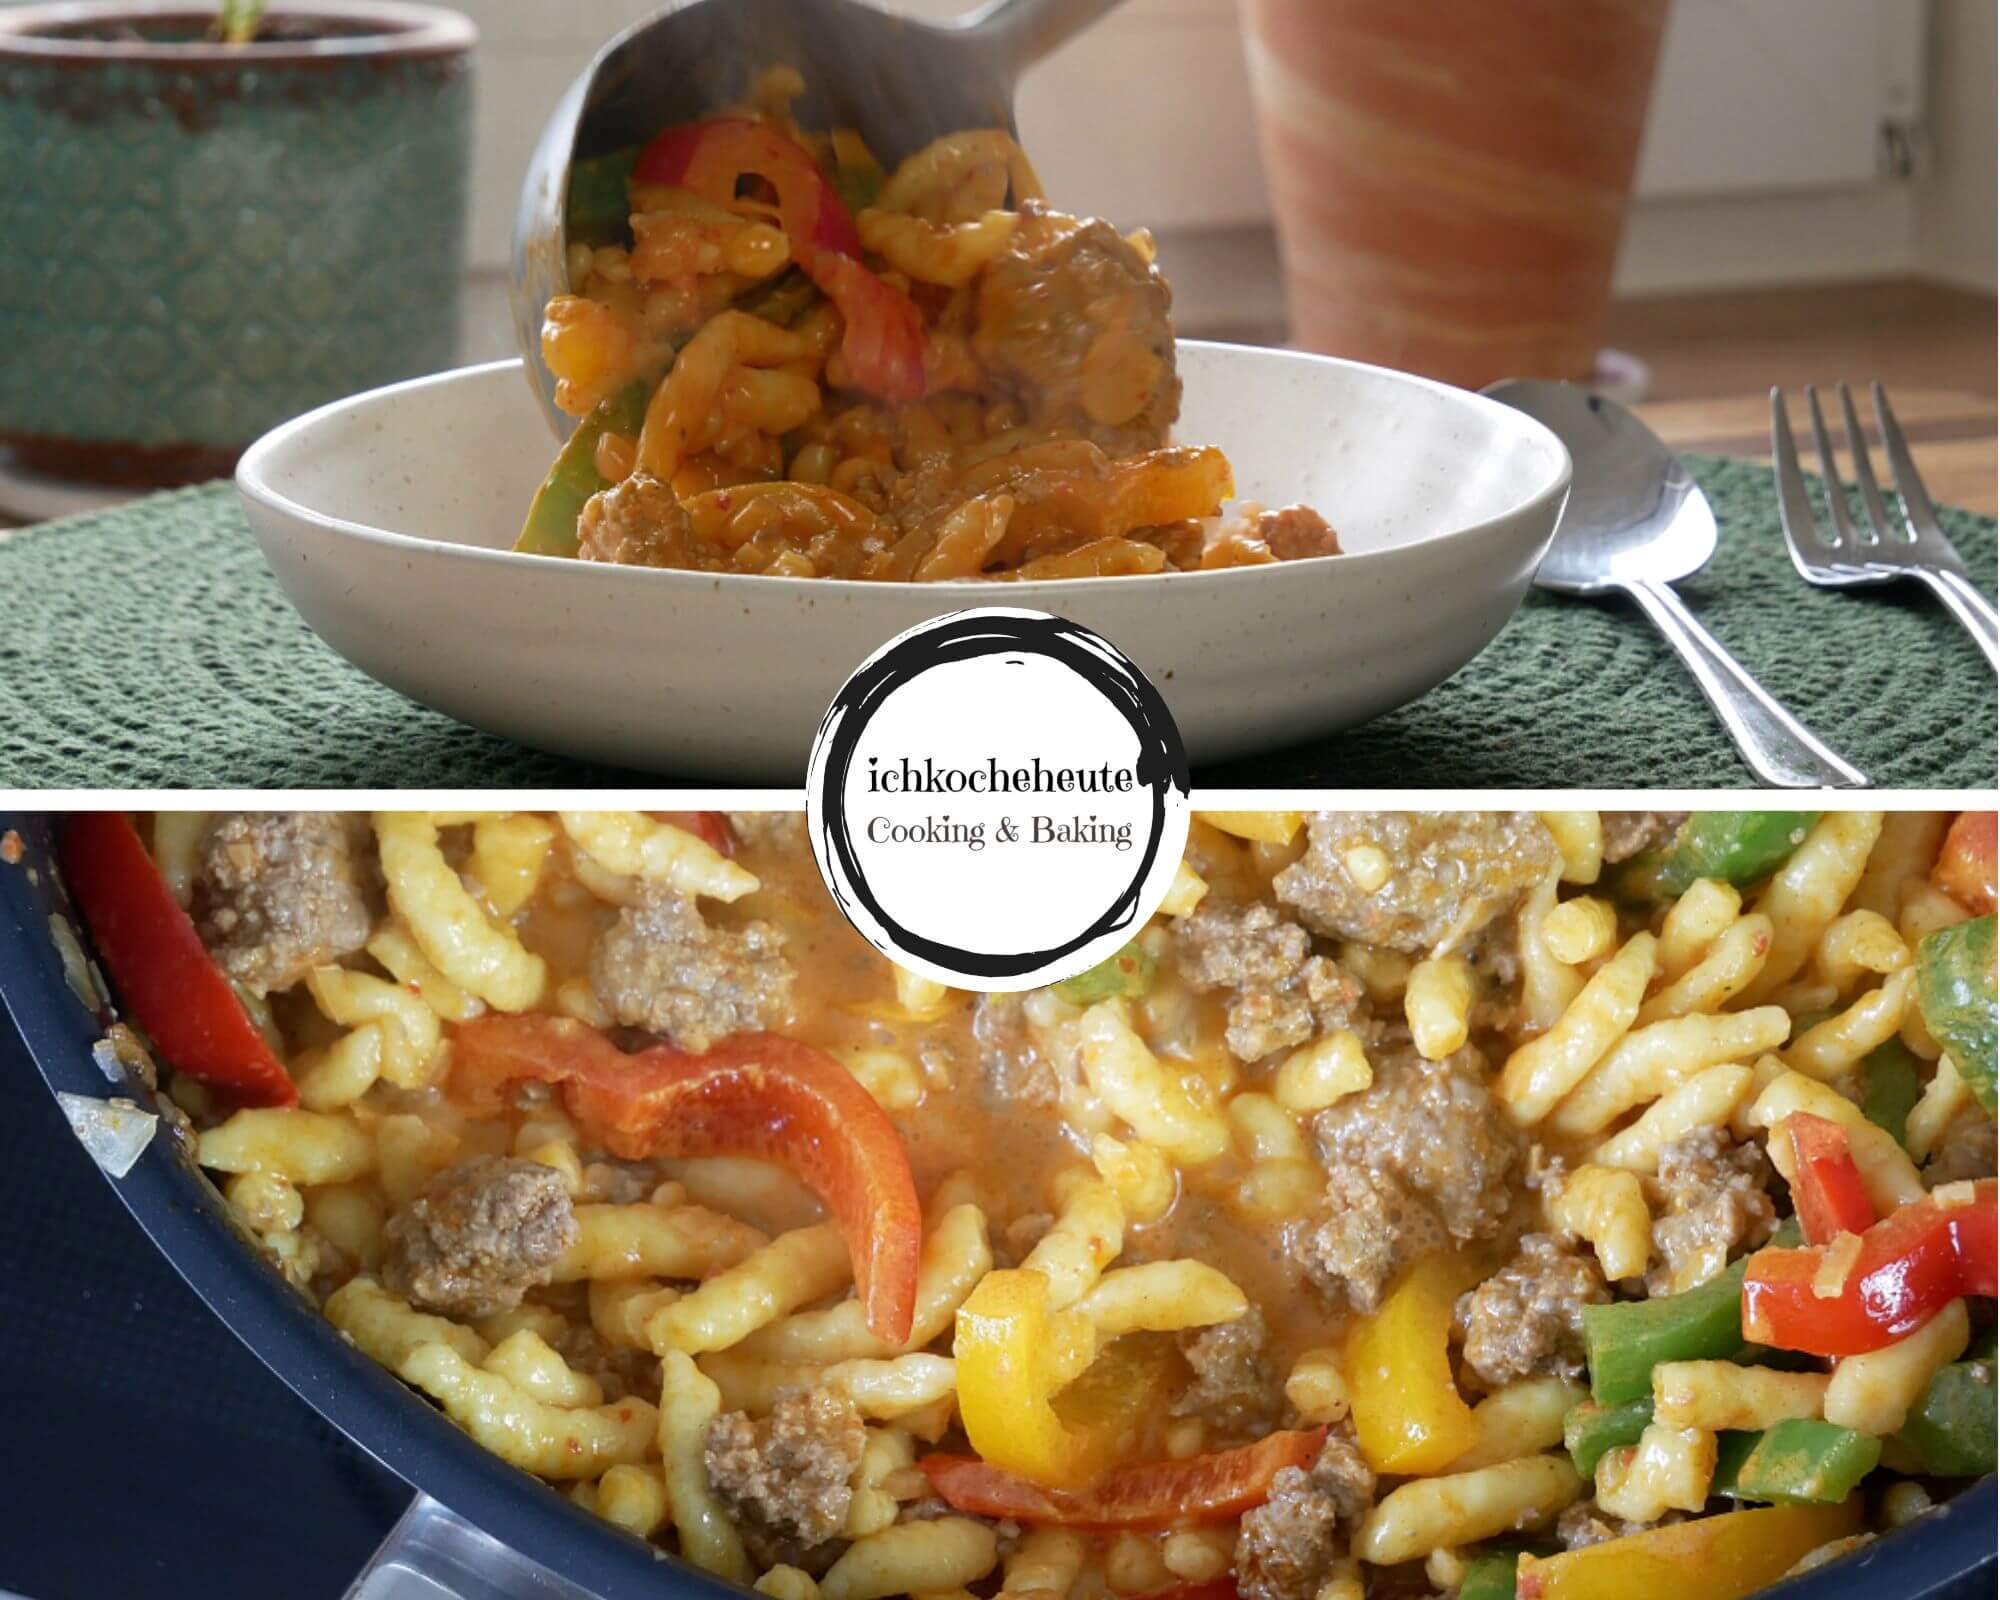 Serving Creamy Spaetzle Stir-Fry with Paprika & Ground Meat